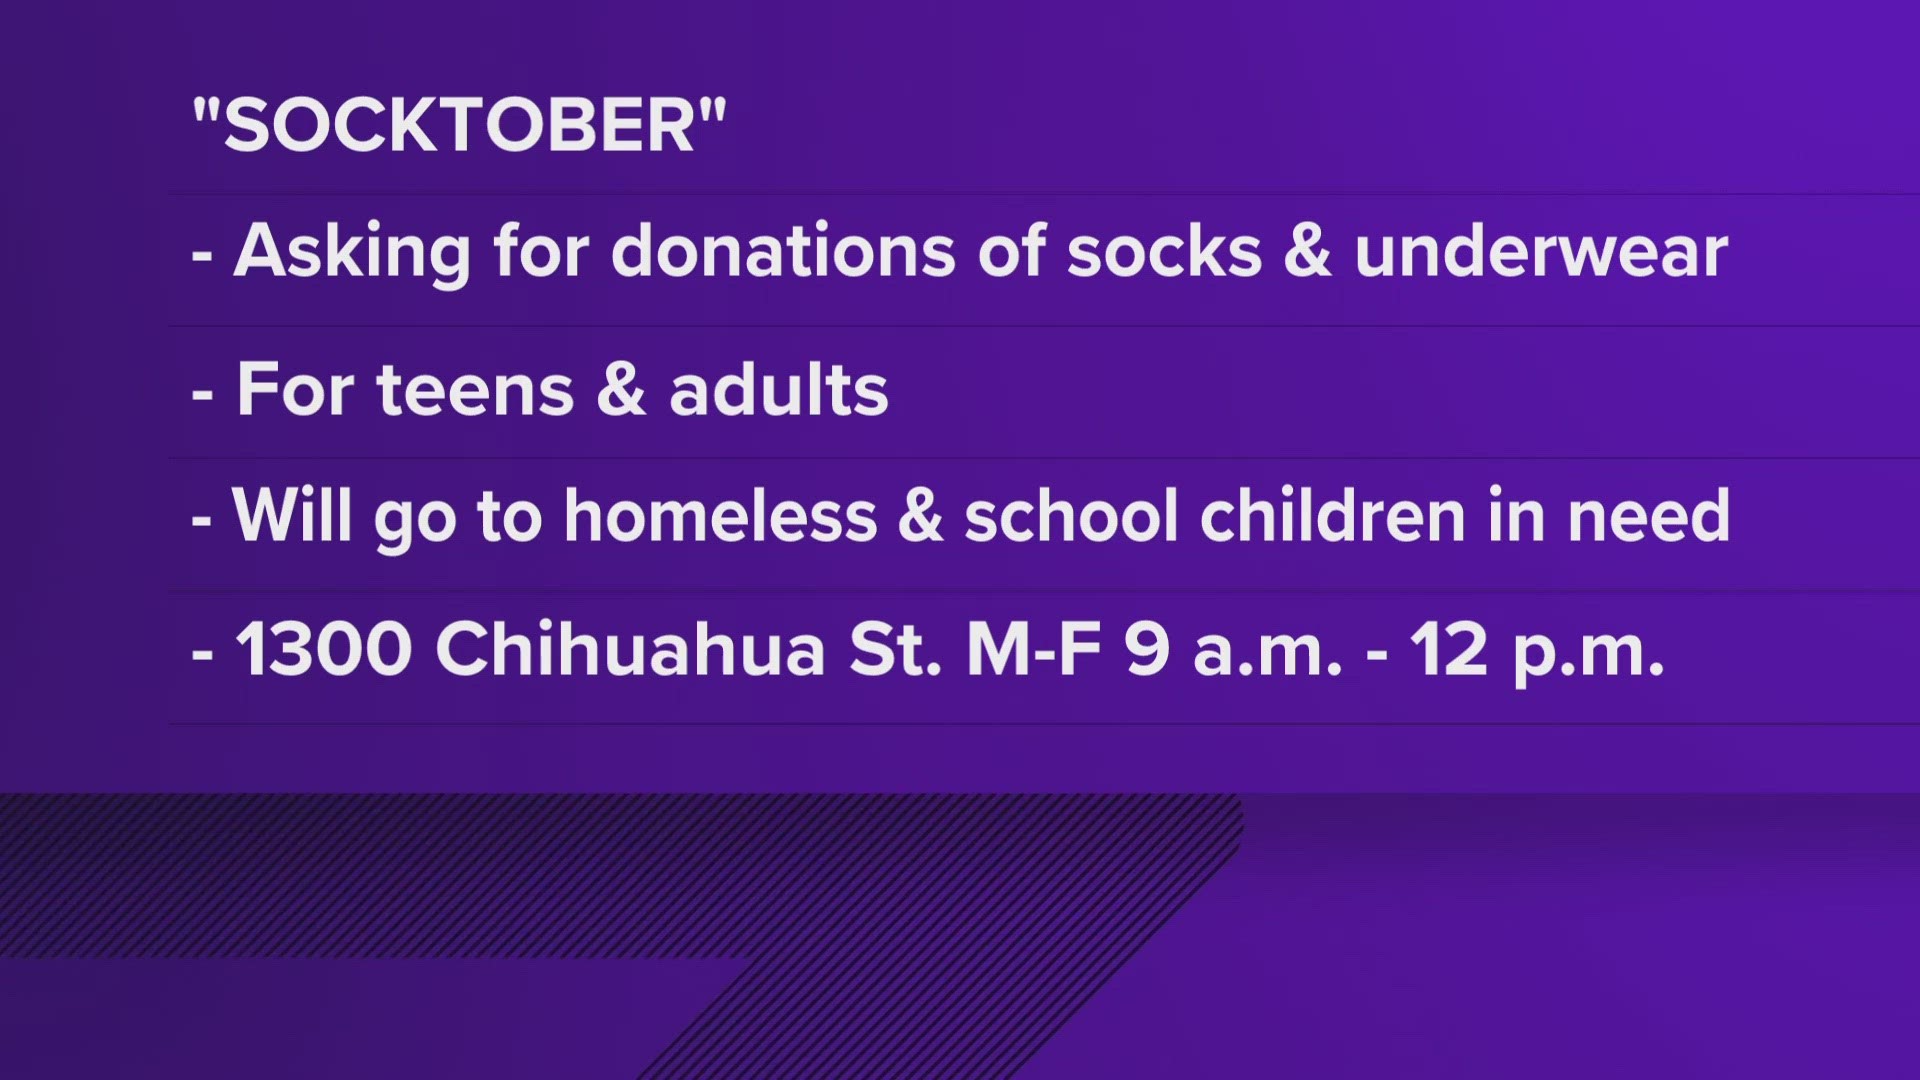 Donate socks and undies for folks in need